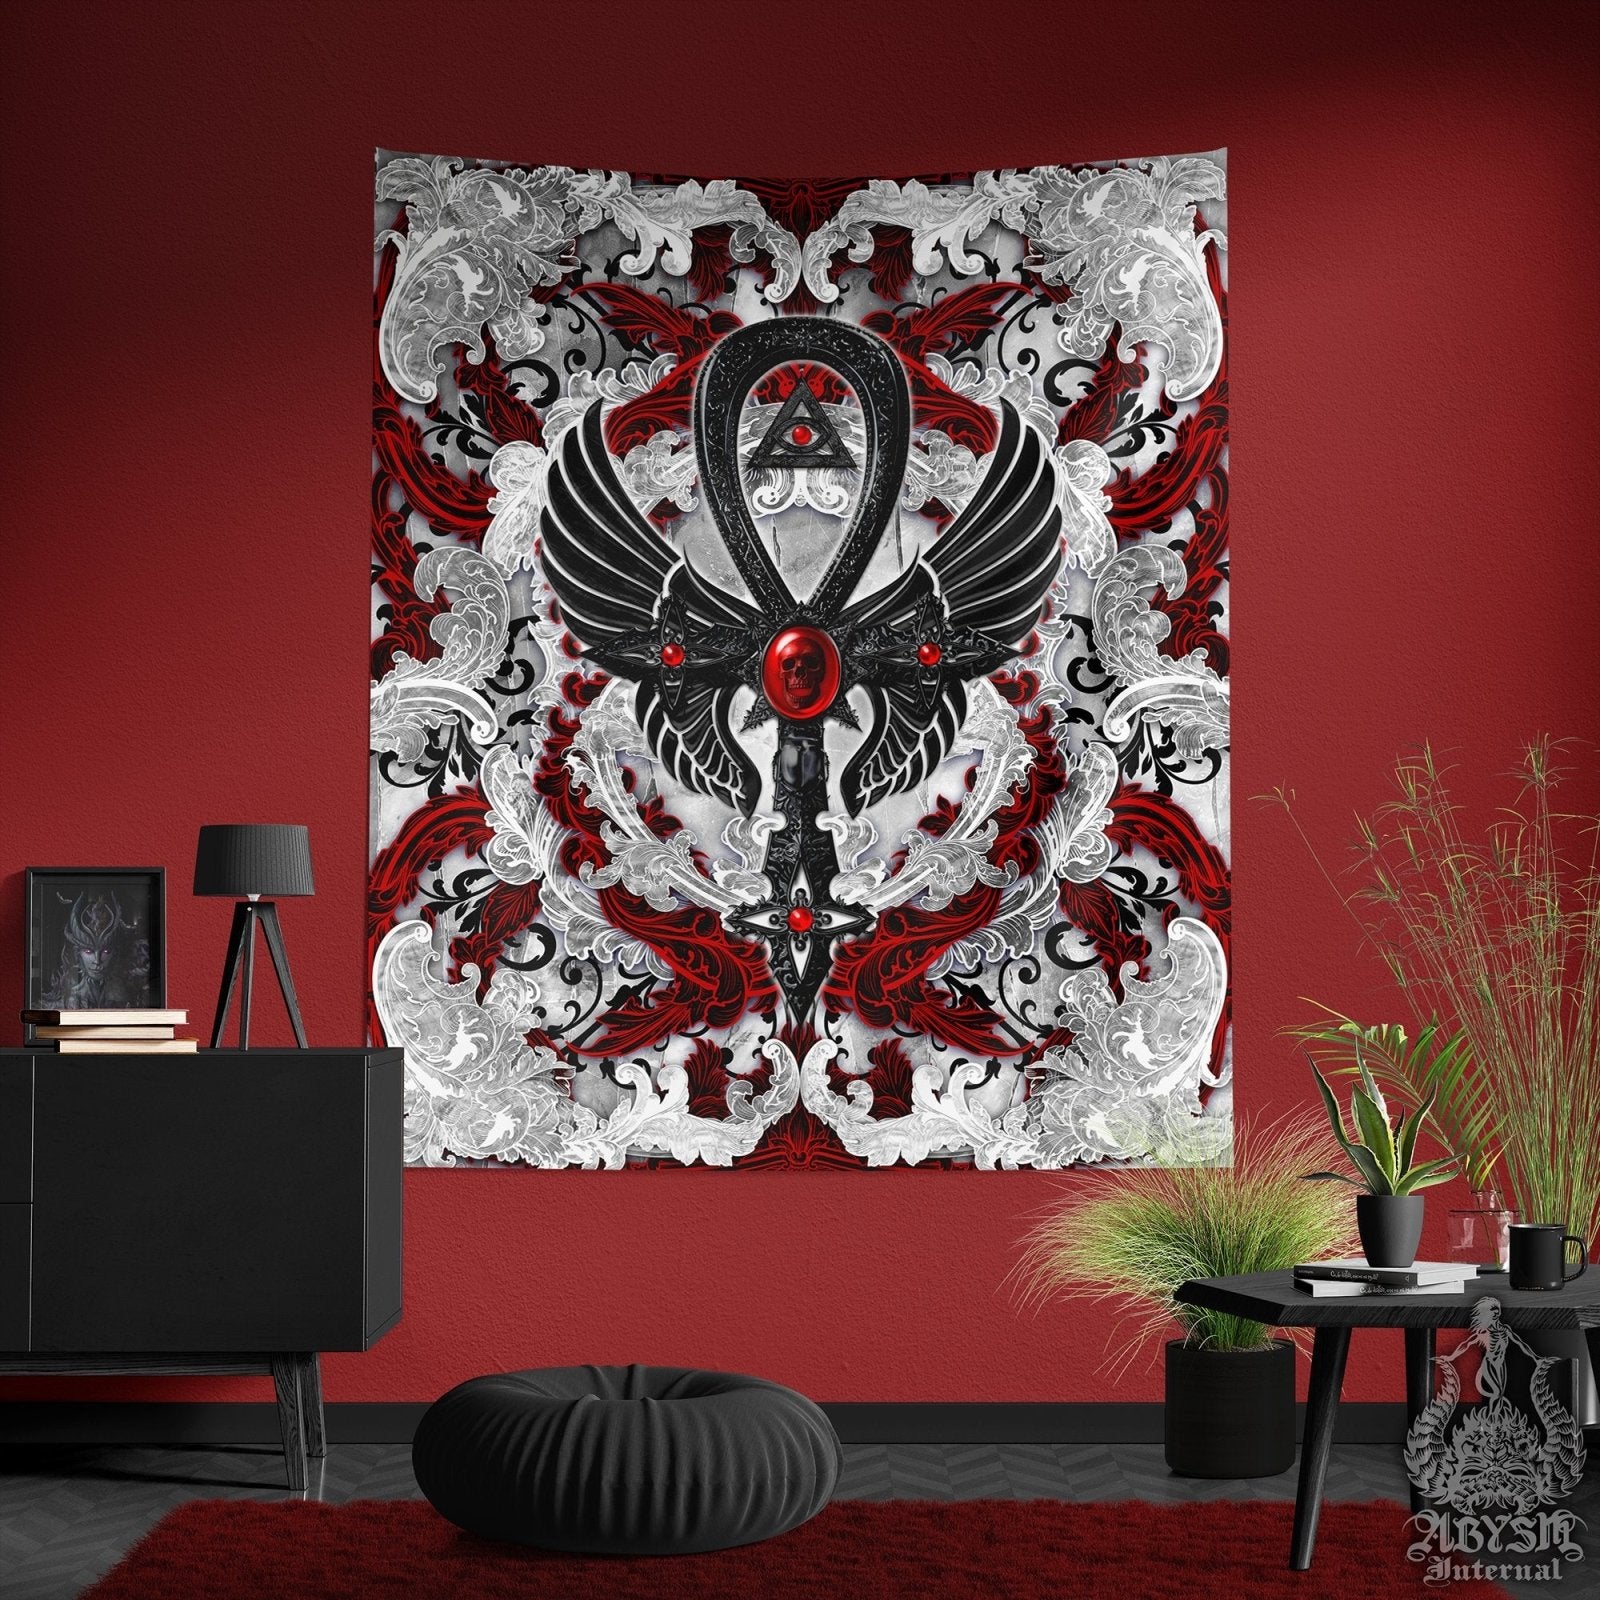 Gothic Tapestry, Ankh Wall Hanging, Occult Home Decor, Art Print - Bloody Goth Cross, Black - Abysm Internal